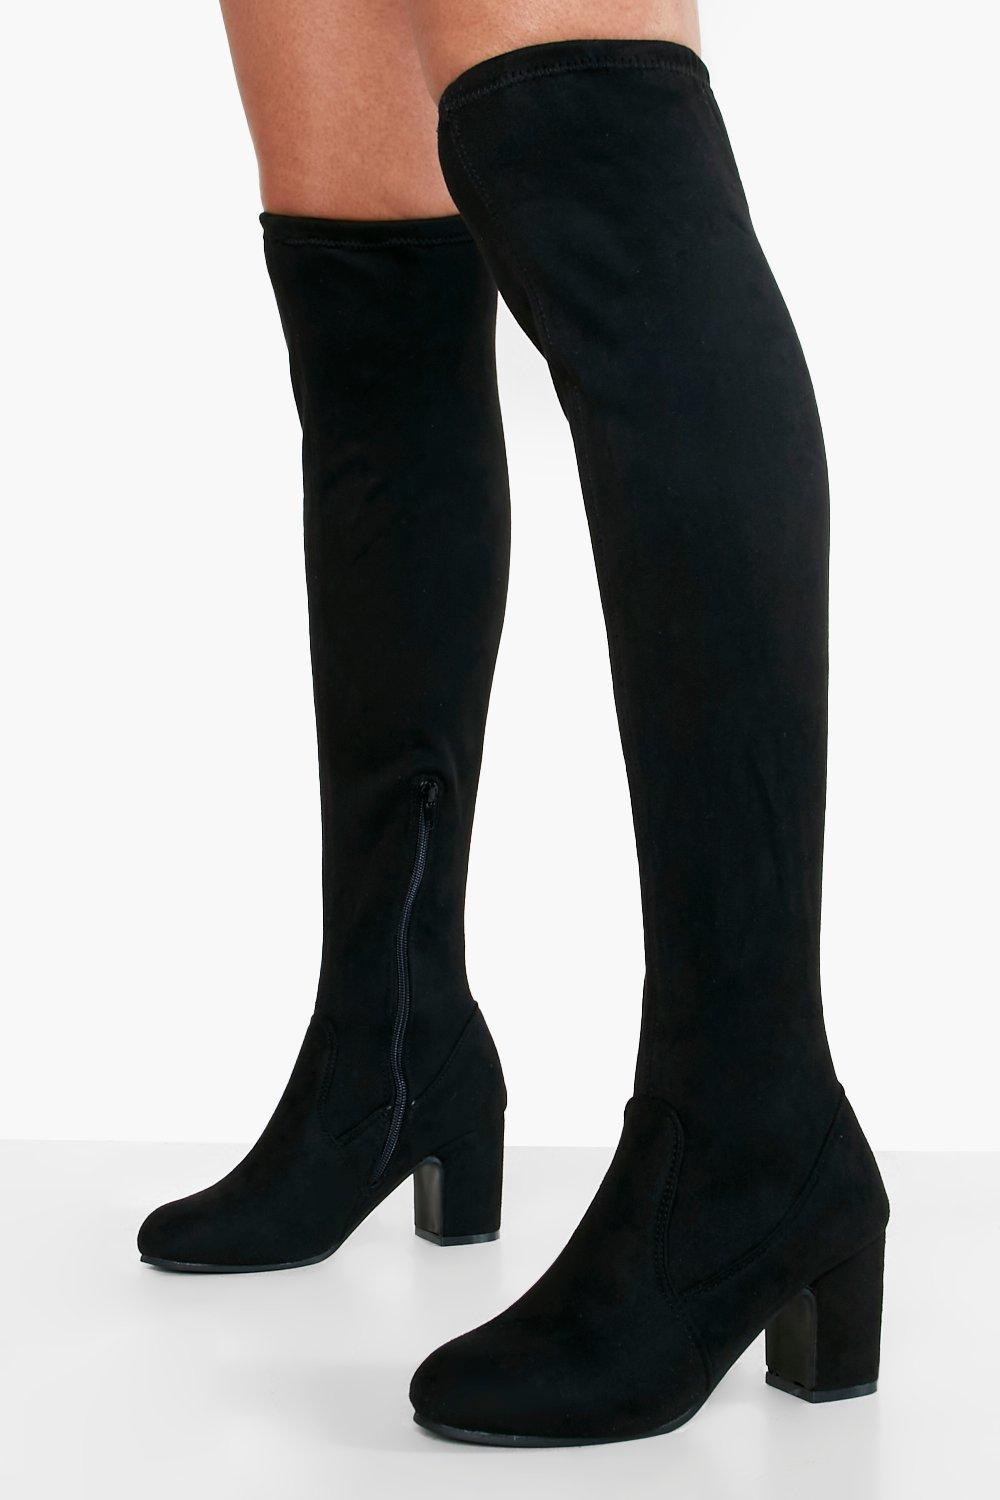 black suede over the knee thigh high flat boots